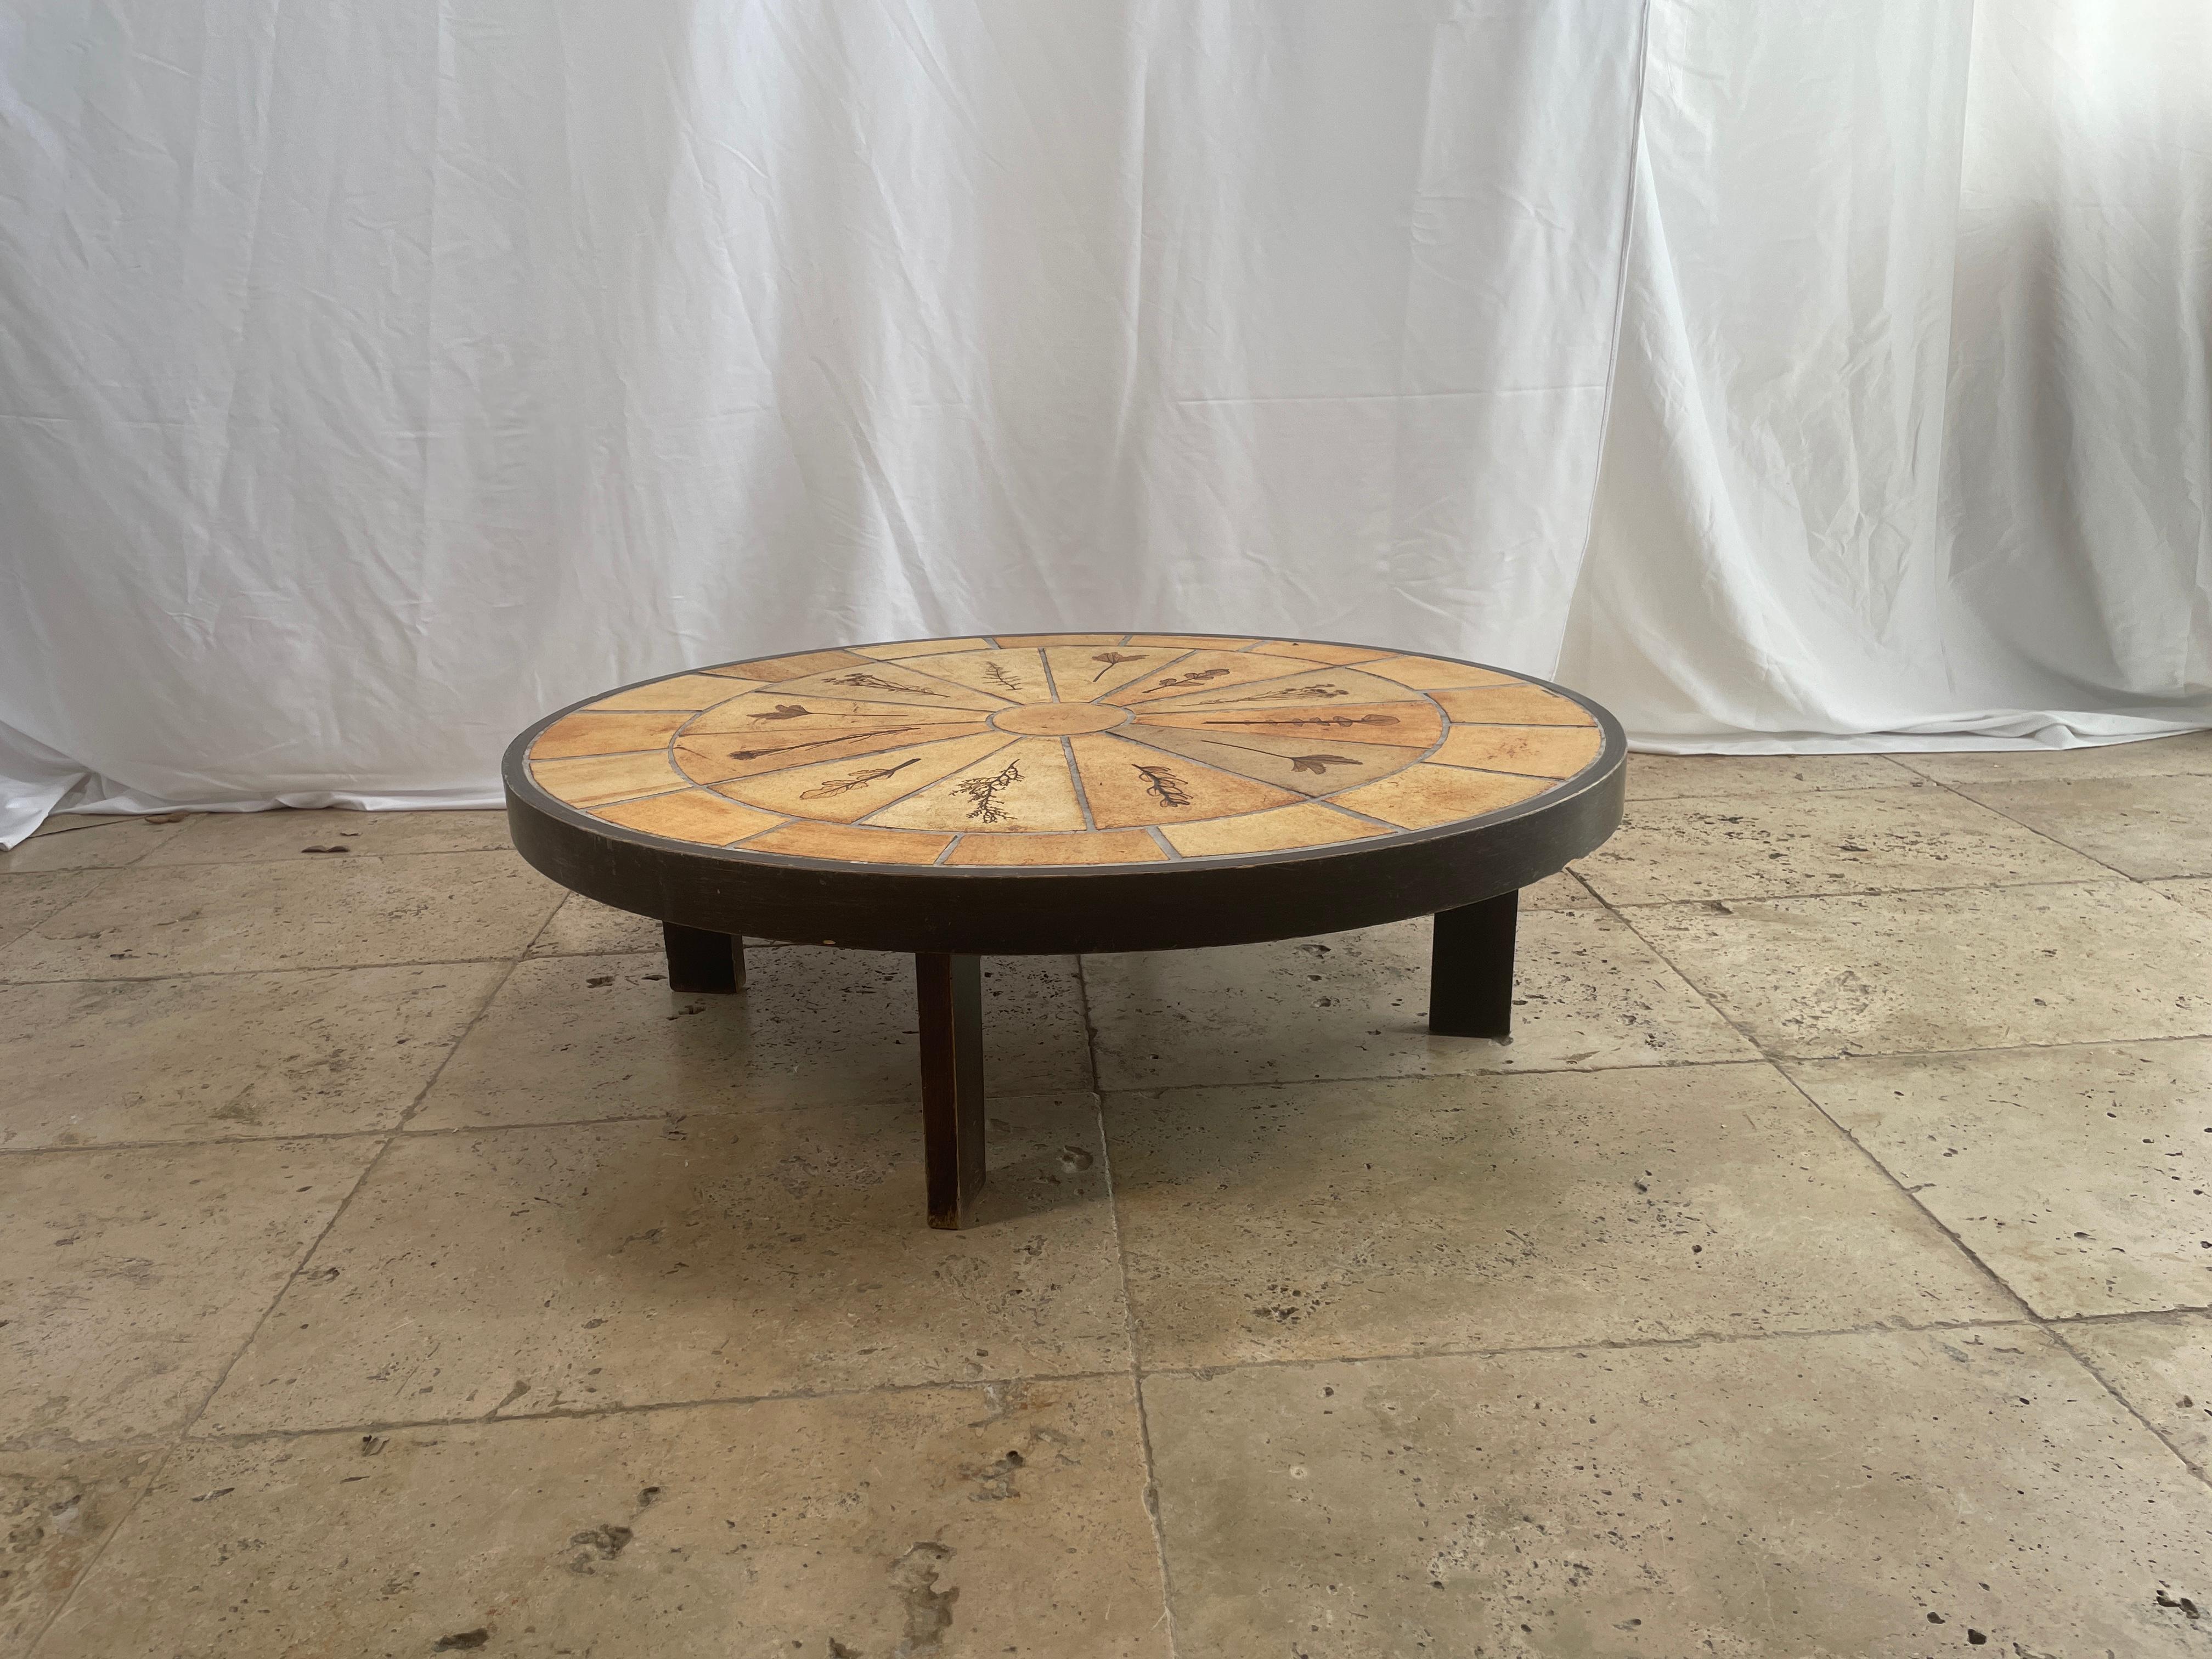 Oval coffee table made of wood by Roger Capron. The top is in earthenware with natural patterns. Signed Roger Capron dating from 1970 made in France 

Some marks on the wood due to use, Faience in perfect condition.
The table is in a good